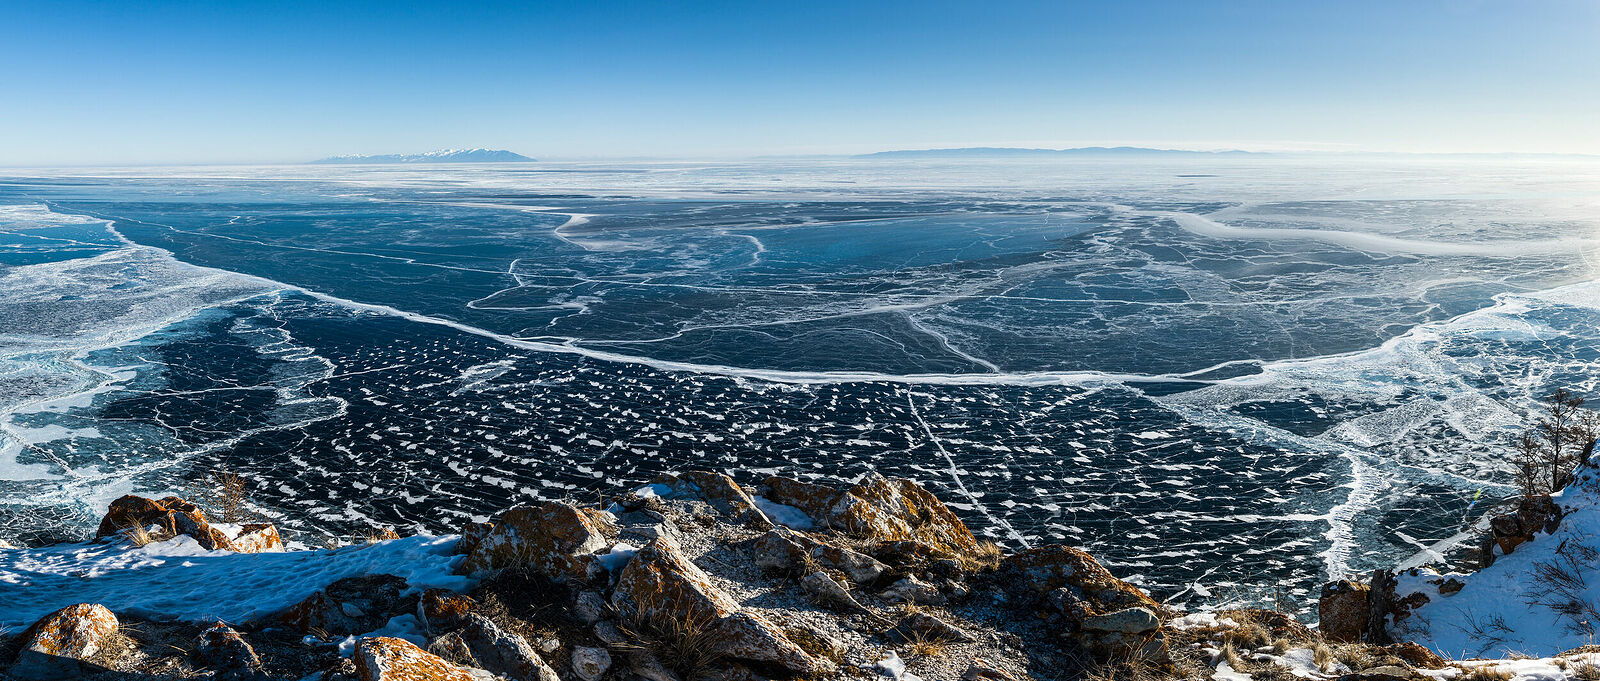 The first ice on Lake Baikal, seen from Olkhon Island. The area shown is the deepest part of the lake at more than 1600 meters. The shore in the background is more than 50 km from Olkhon.